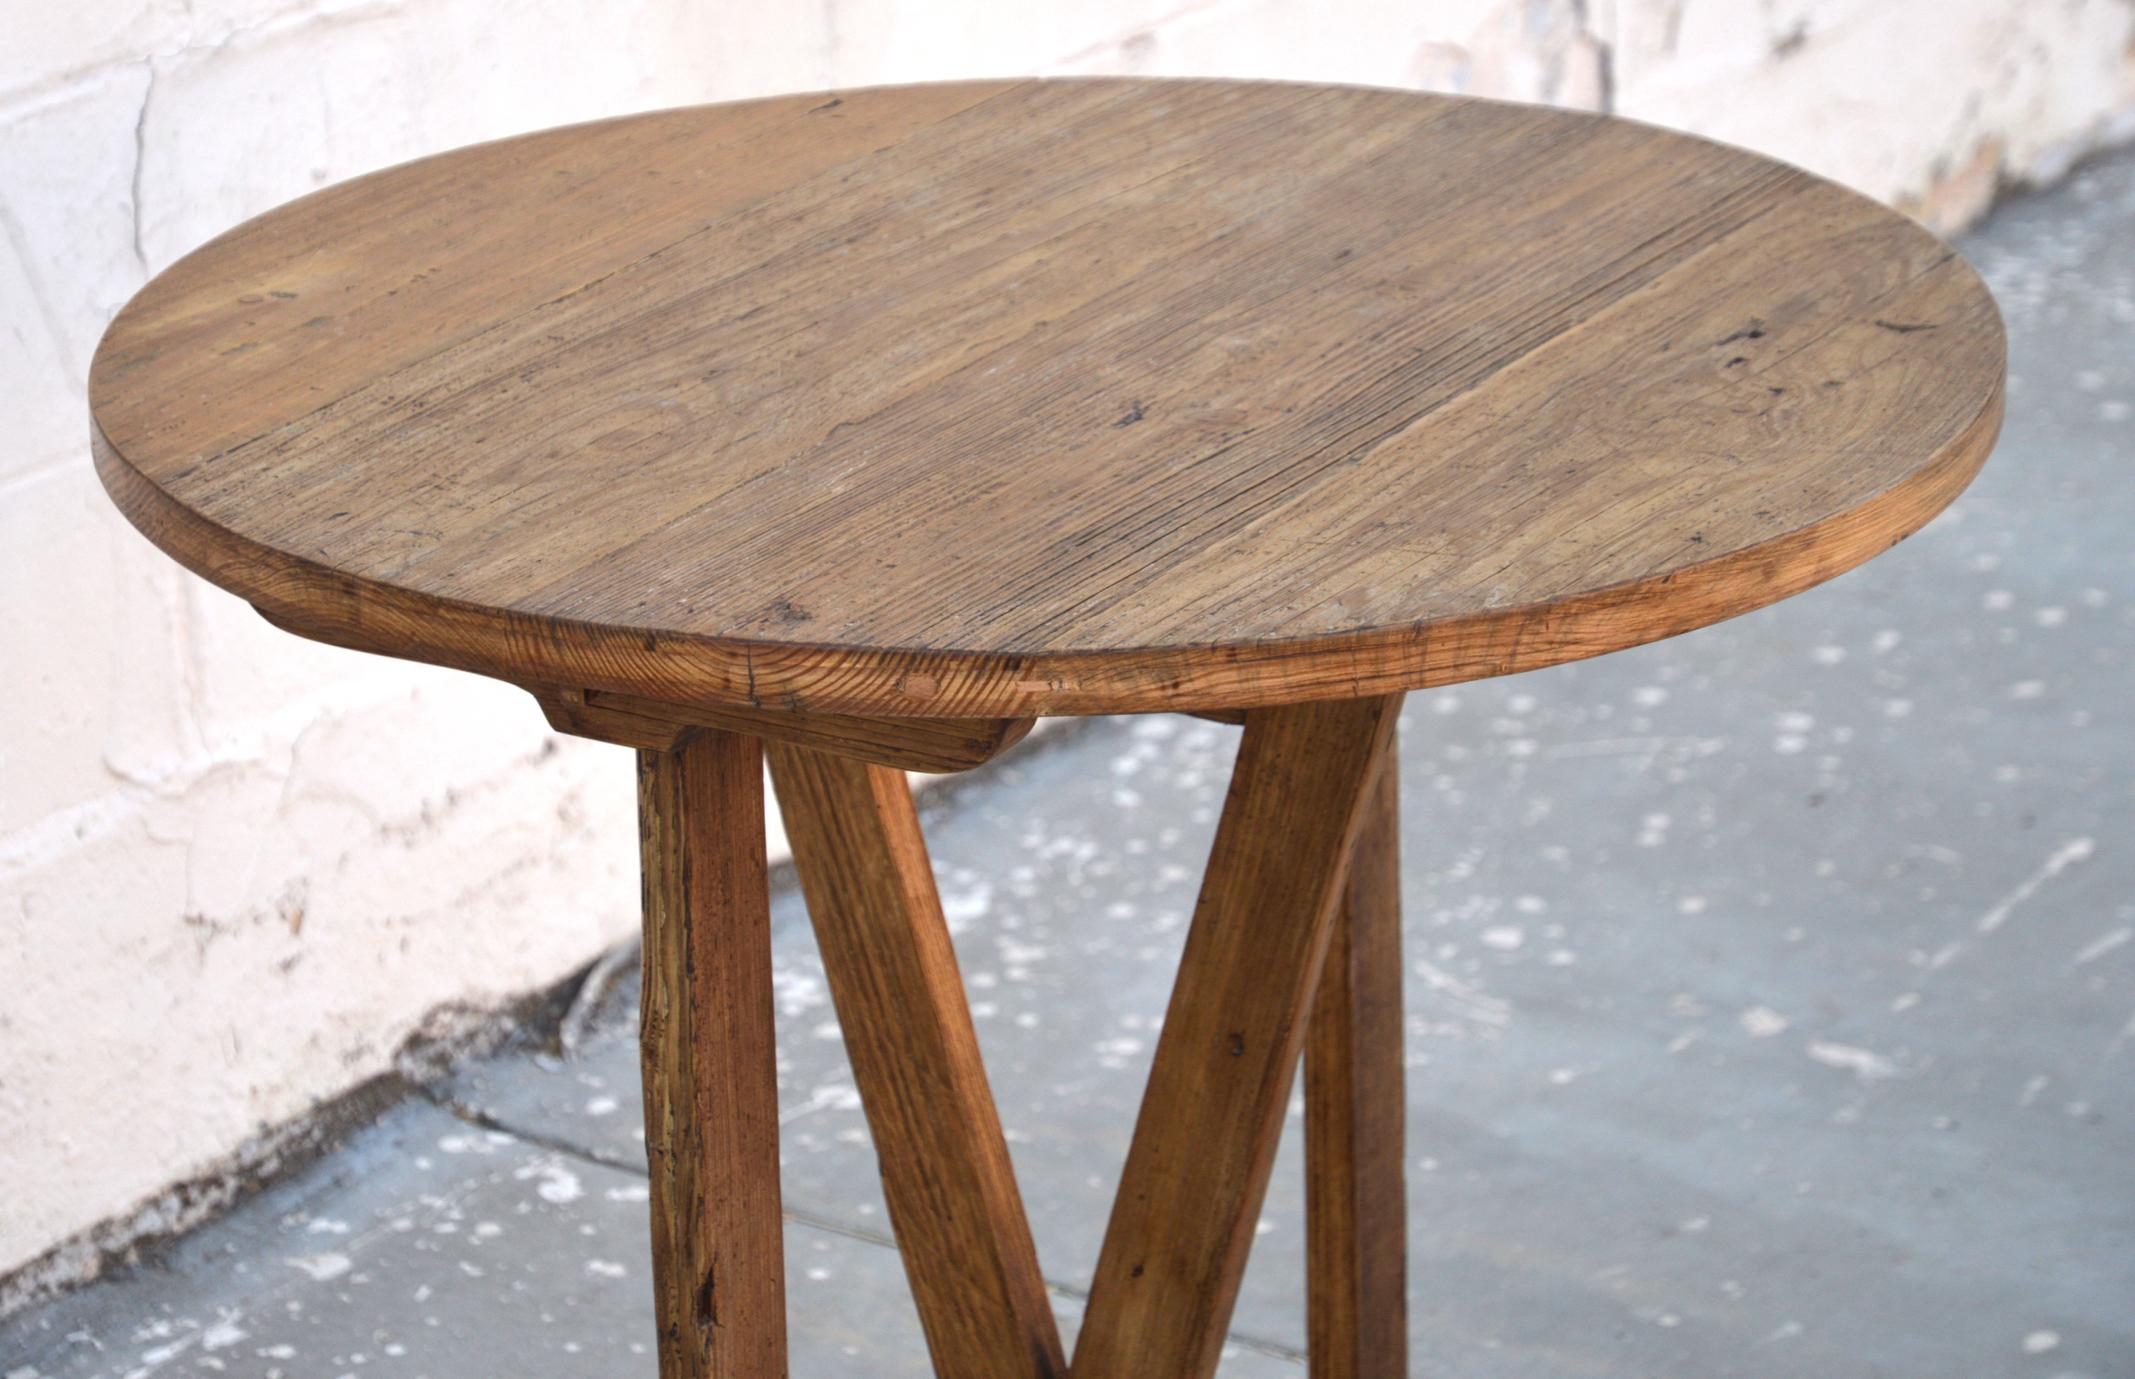 This gate leg table is made from reclaimed pine and has a tilt top which rotates vertically 90 degrees (see pictures 5 - 8). This table is seen here in a 30